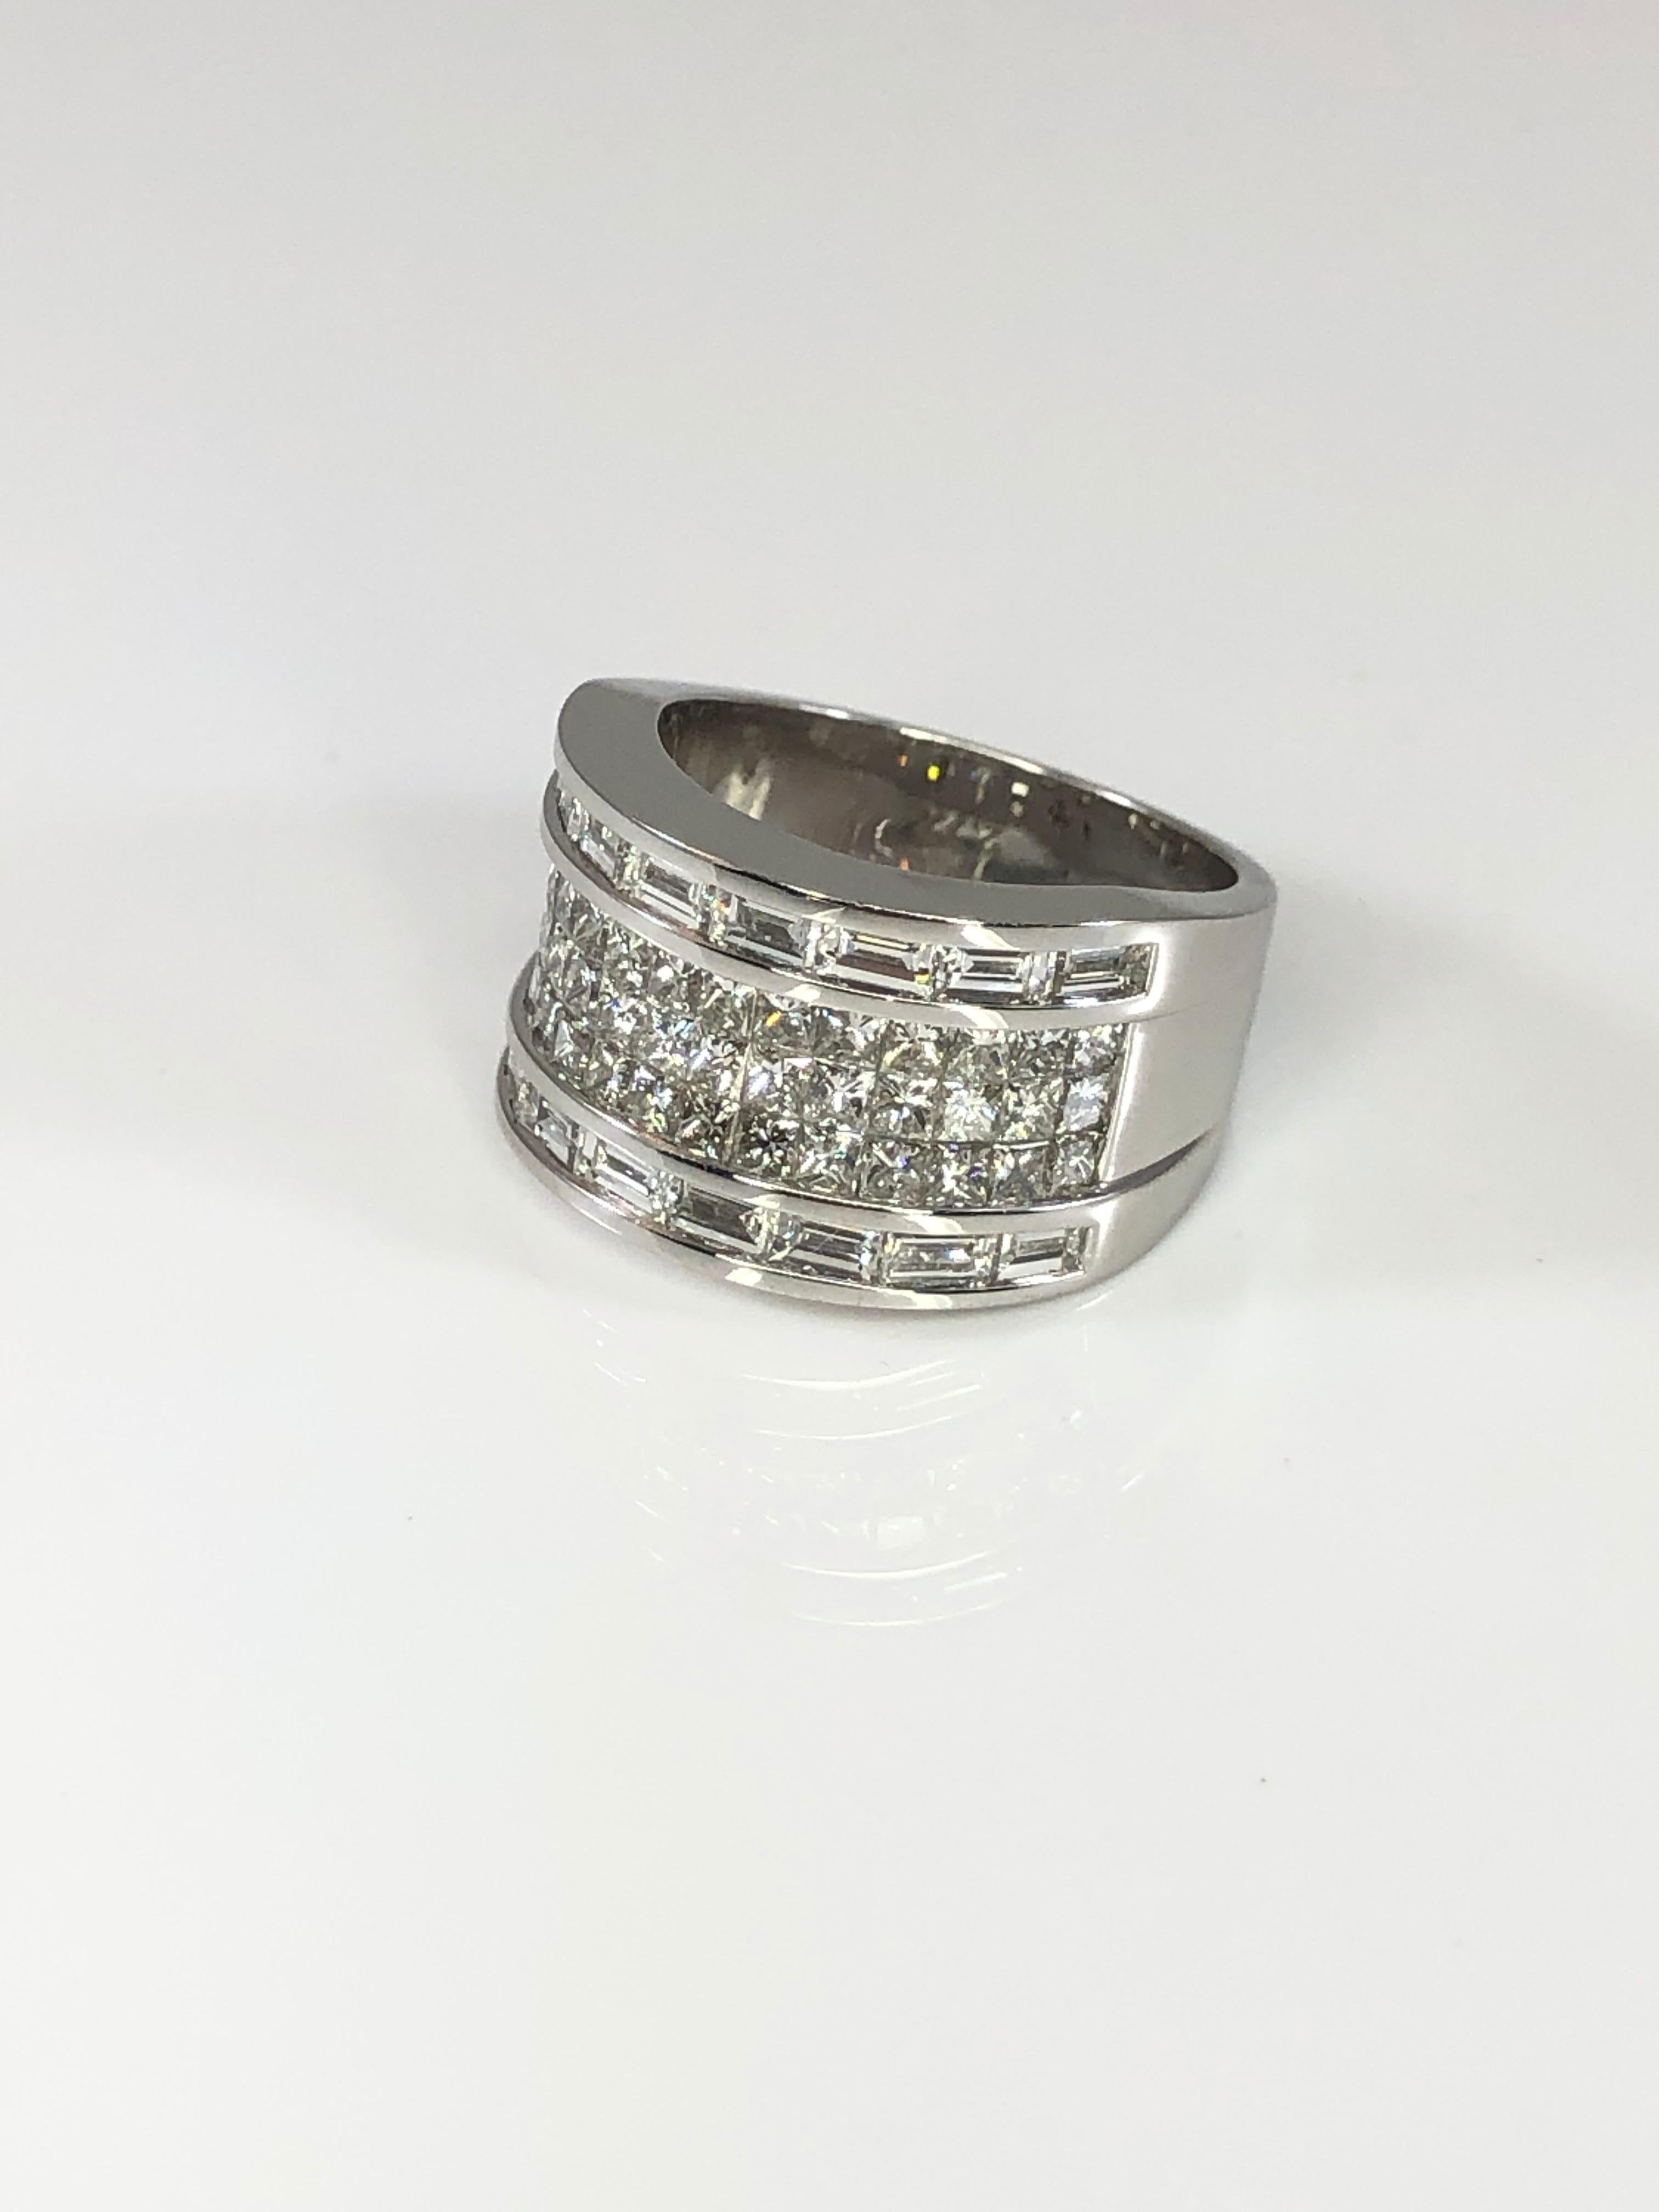 S.Georgios designer wide band made with invisible princess cut diamonds in the middle and baguette-cut lows on the outer sides. This gorgeous ring is handmade from 18 Karat White gold in Athens Greece and featuring a total weight of 2.90 Carat of